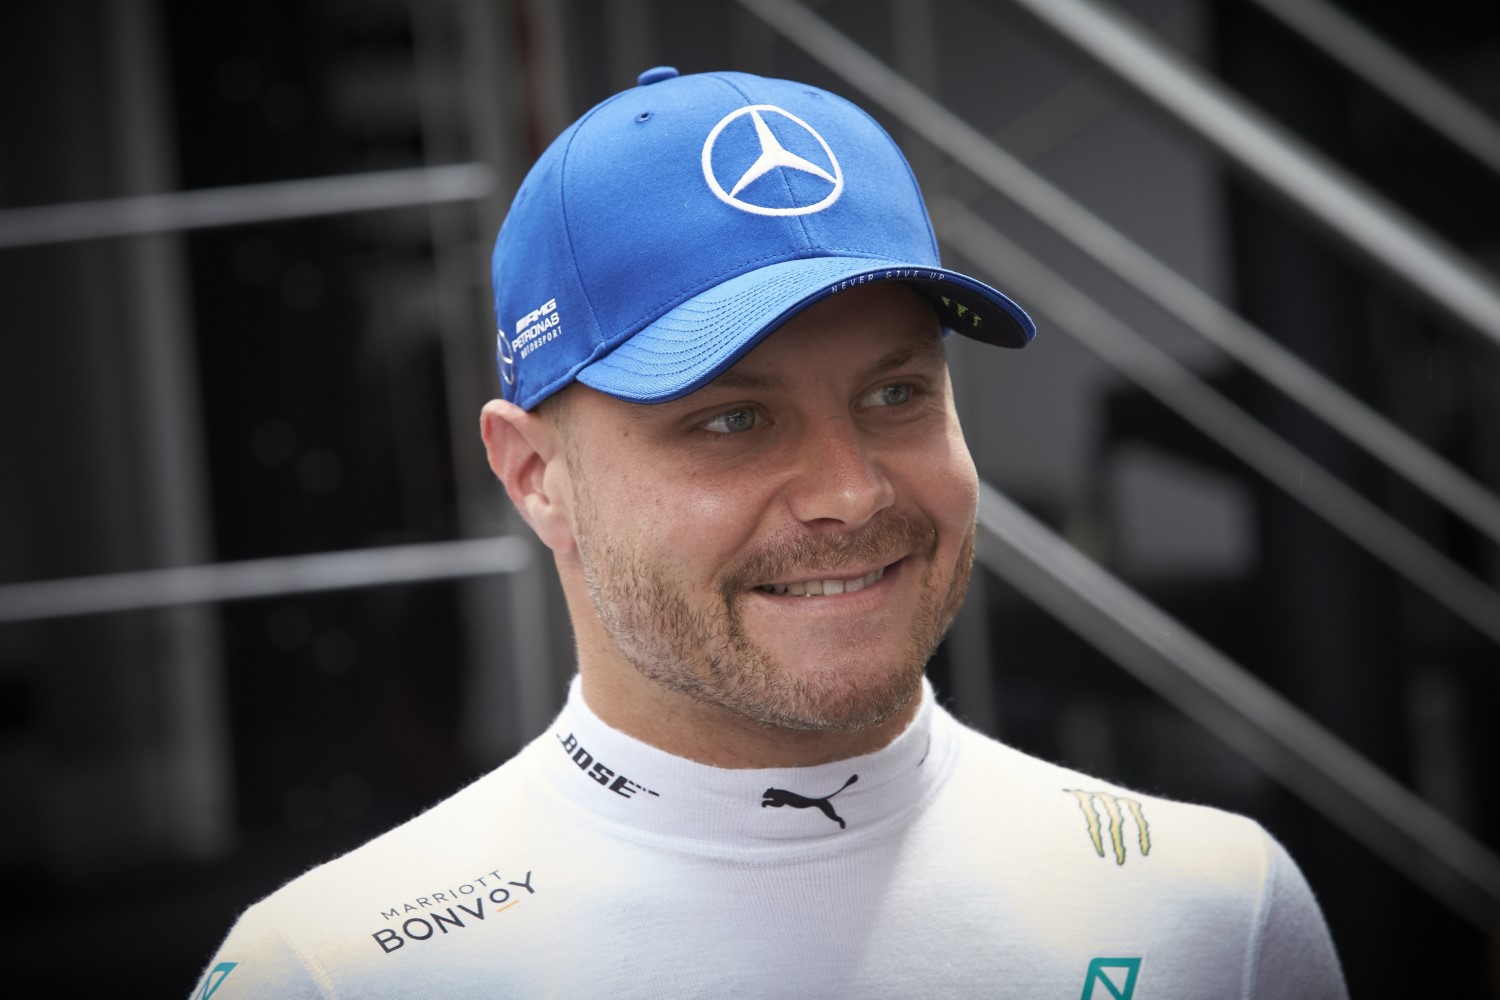 Bottas happy to get another year